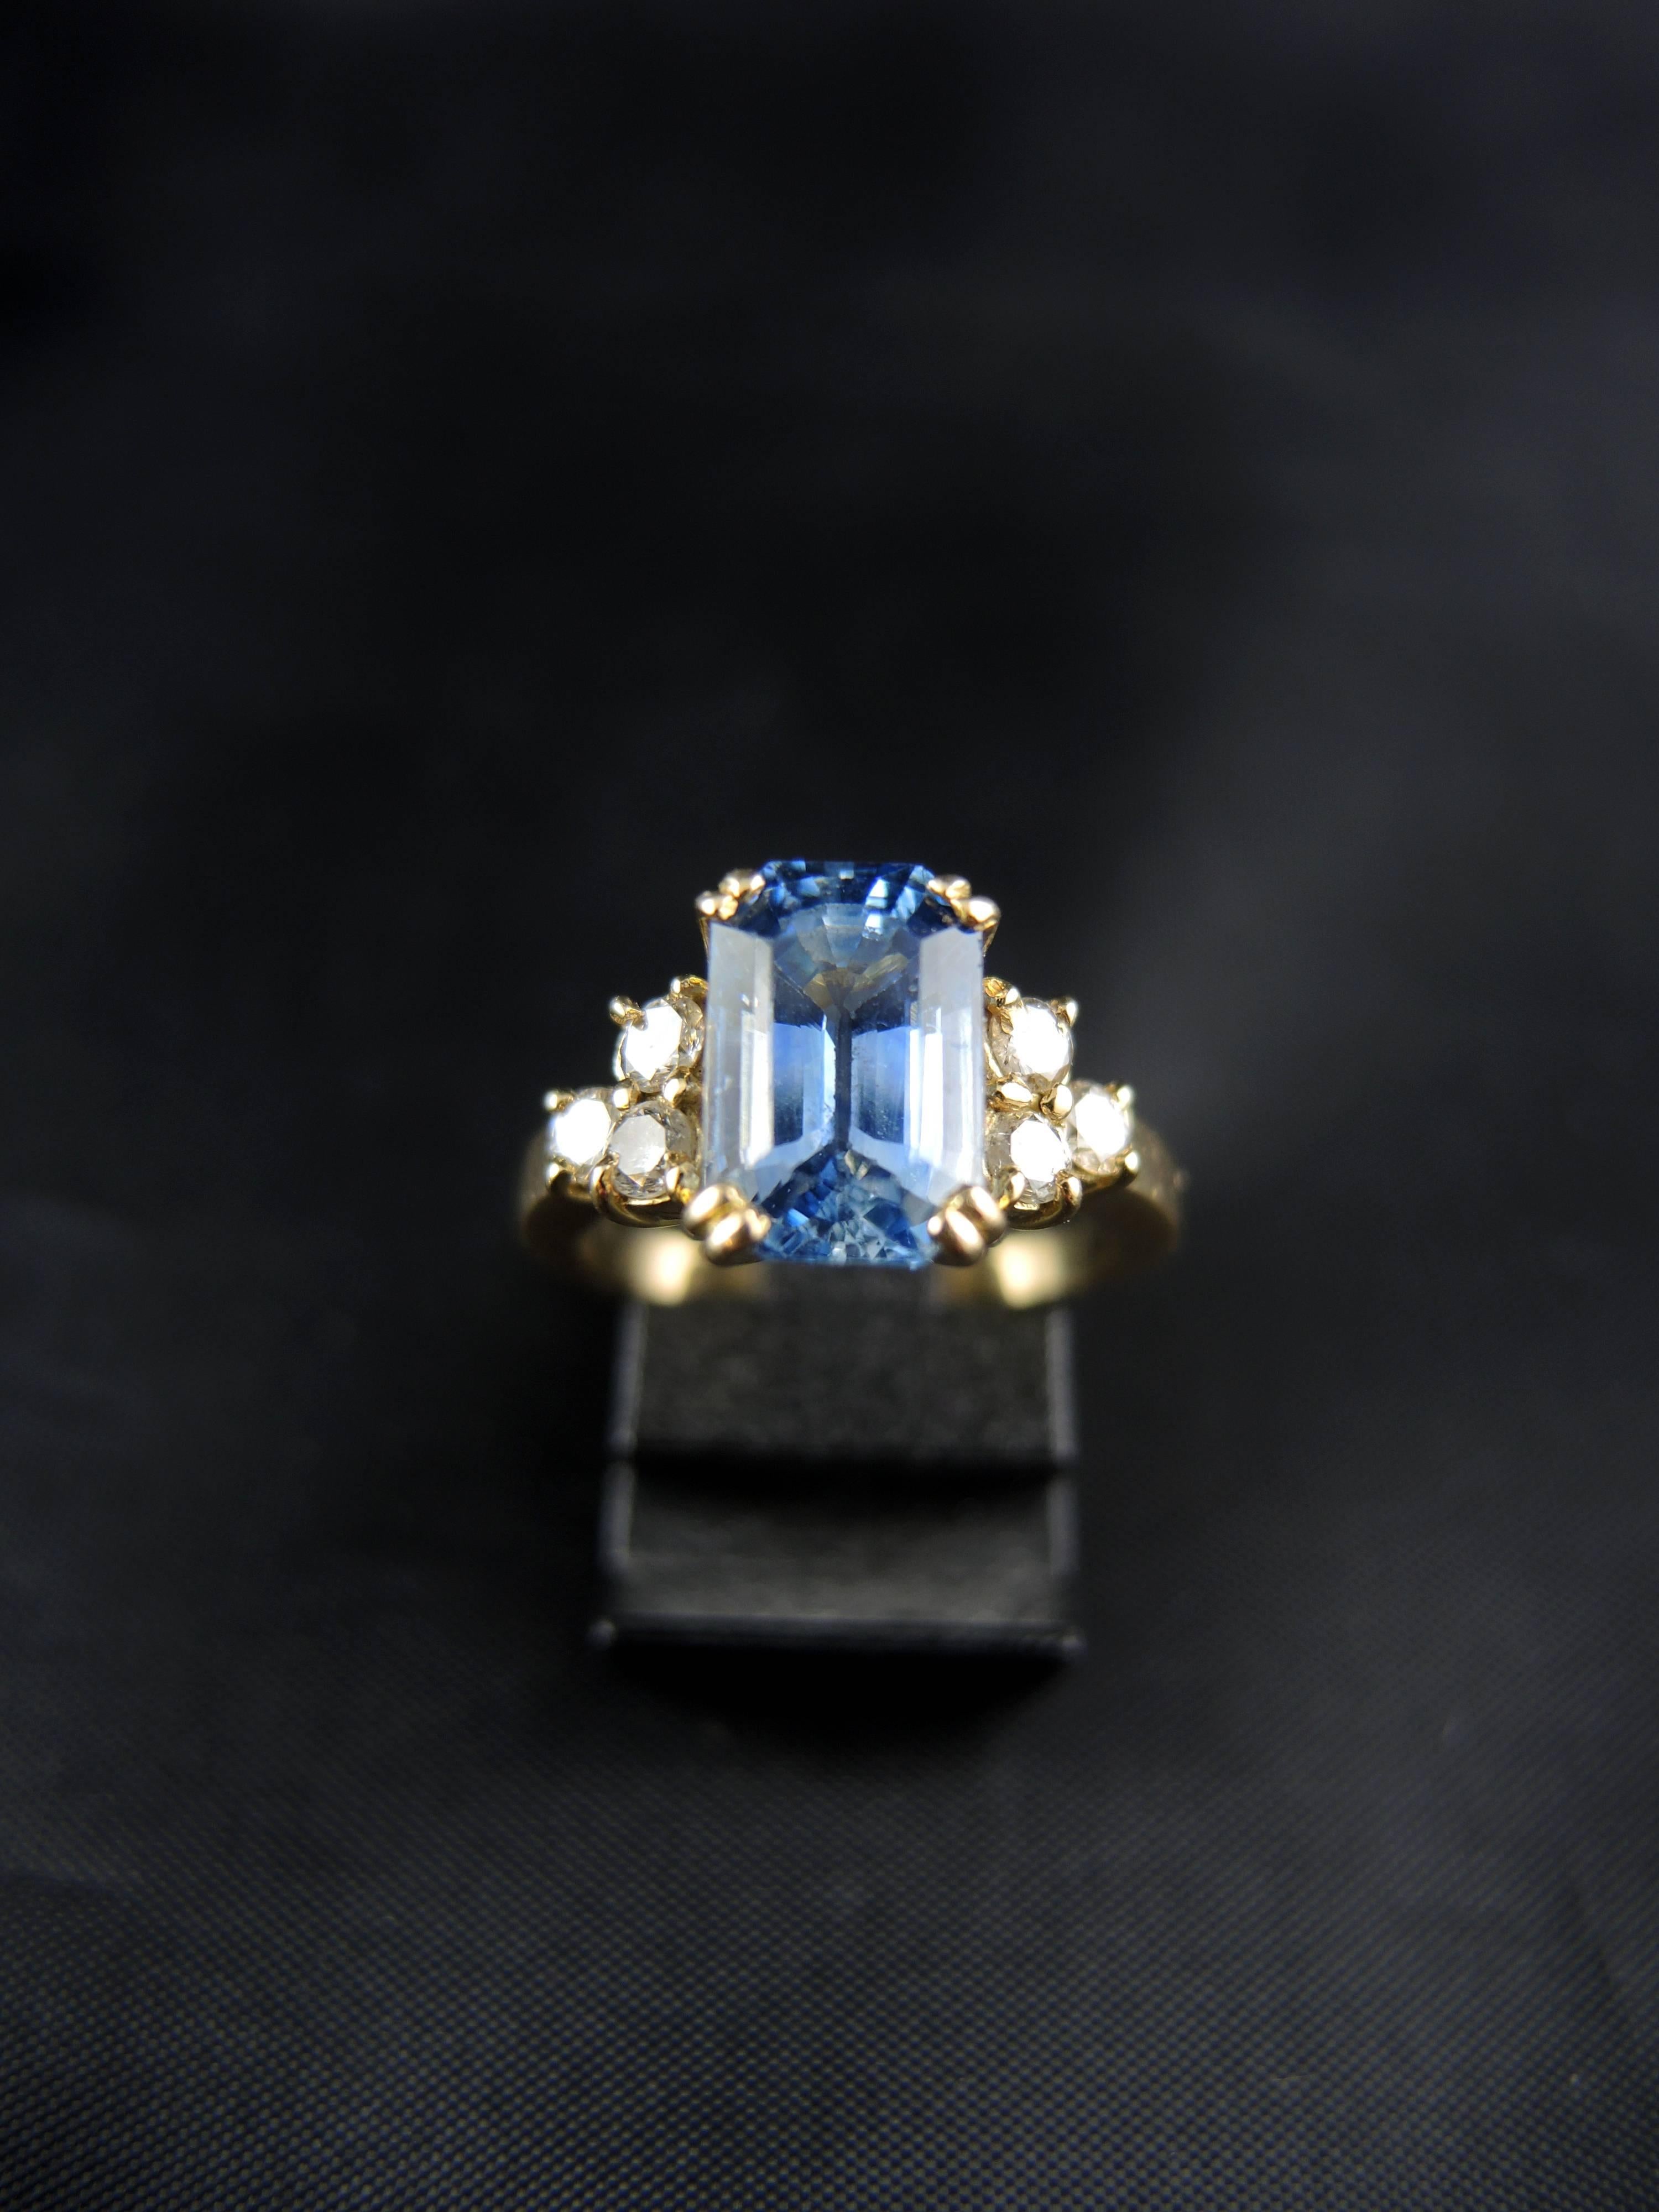 Yellow gold engagment ring (quality mark: head of eagle) set with a central emerald cut sapphire (certainly from Sri Lanka), weight estimated around 3.80 Ct, with modern brillant cut diamonds, which total weight is estimated around 0,40 Ct.

French